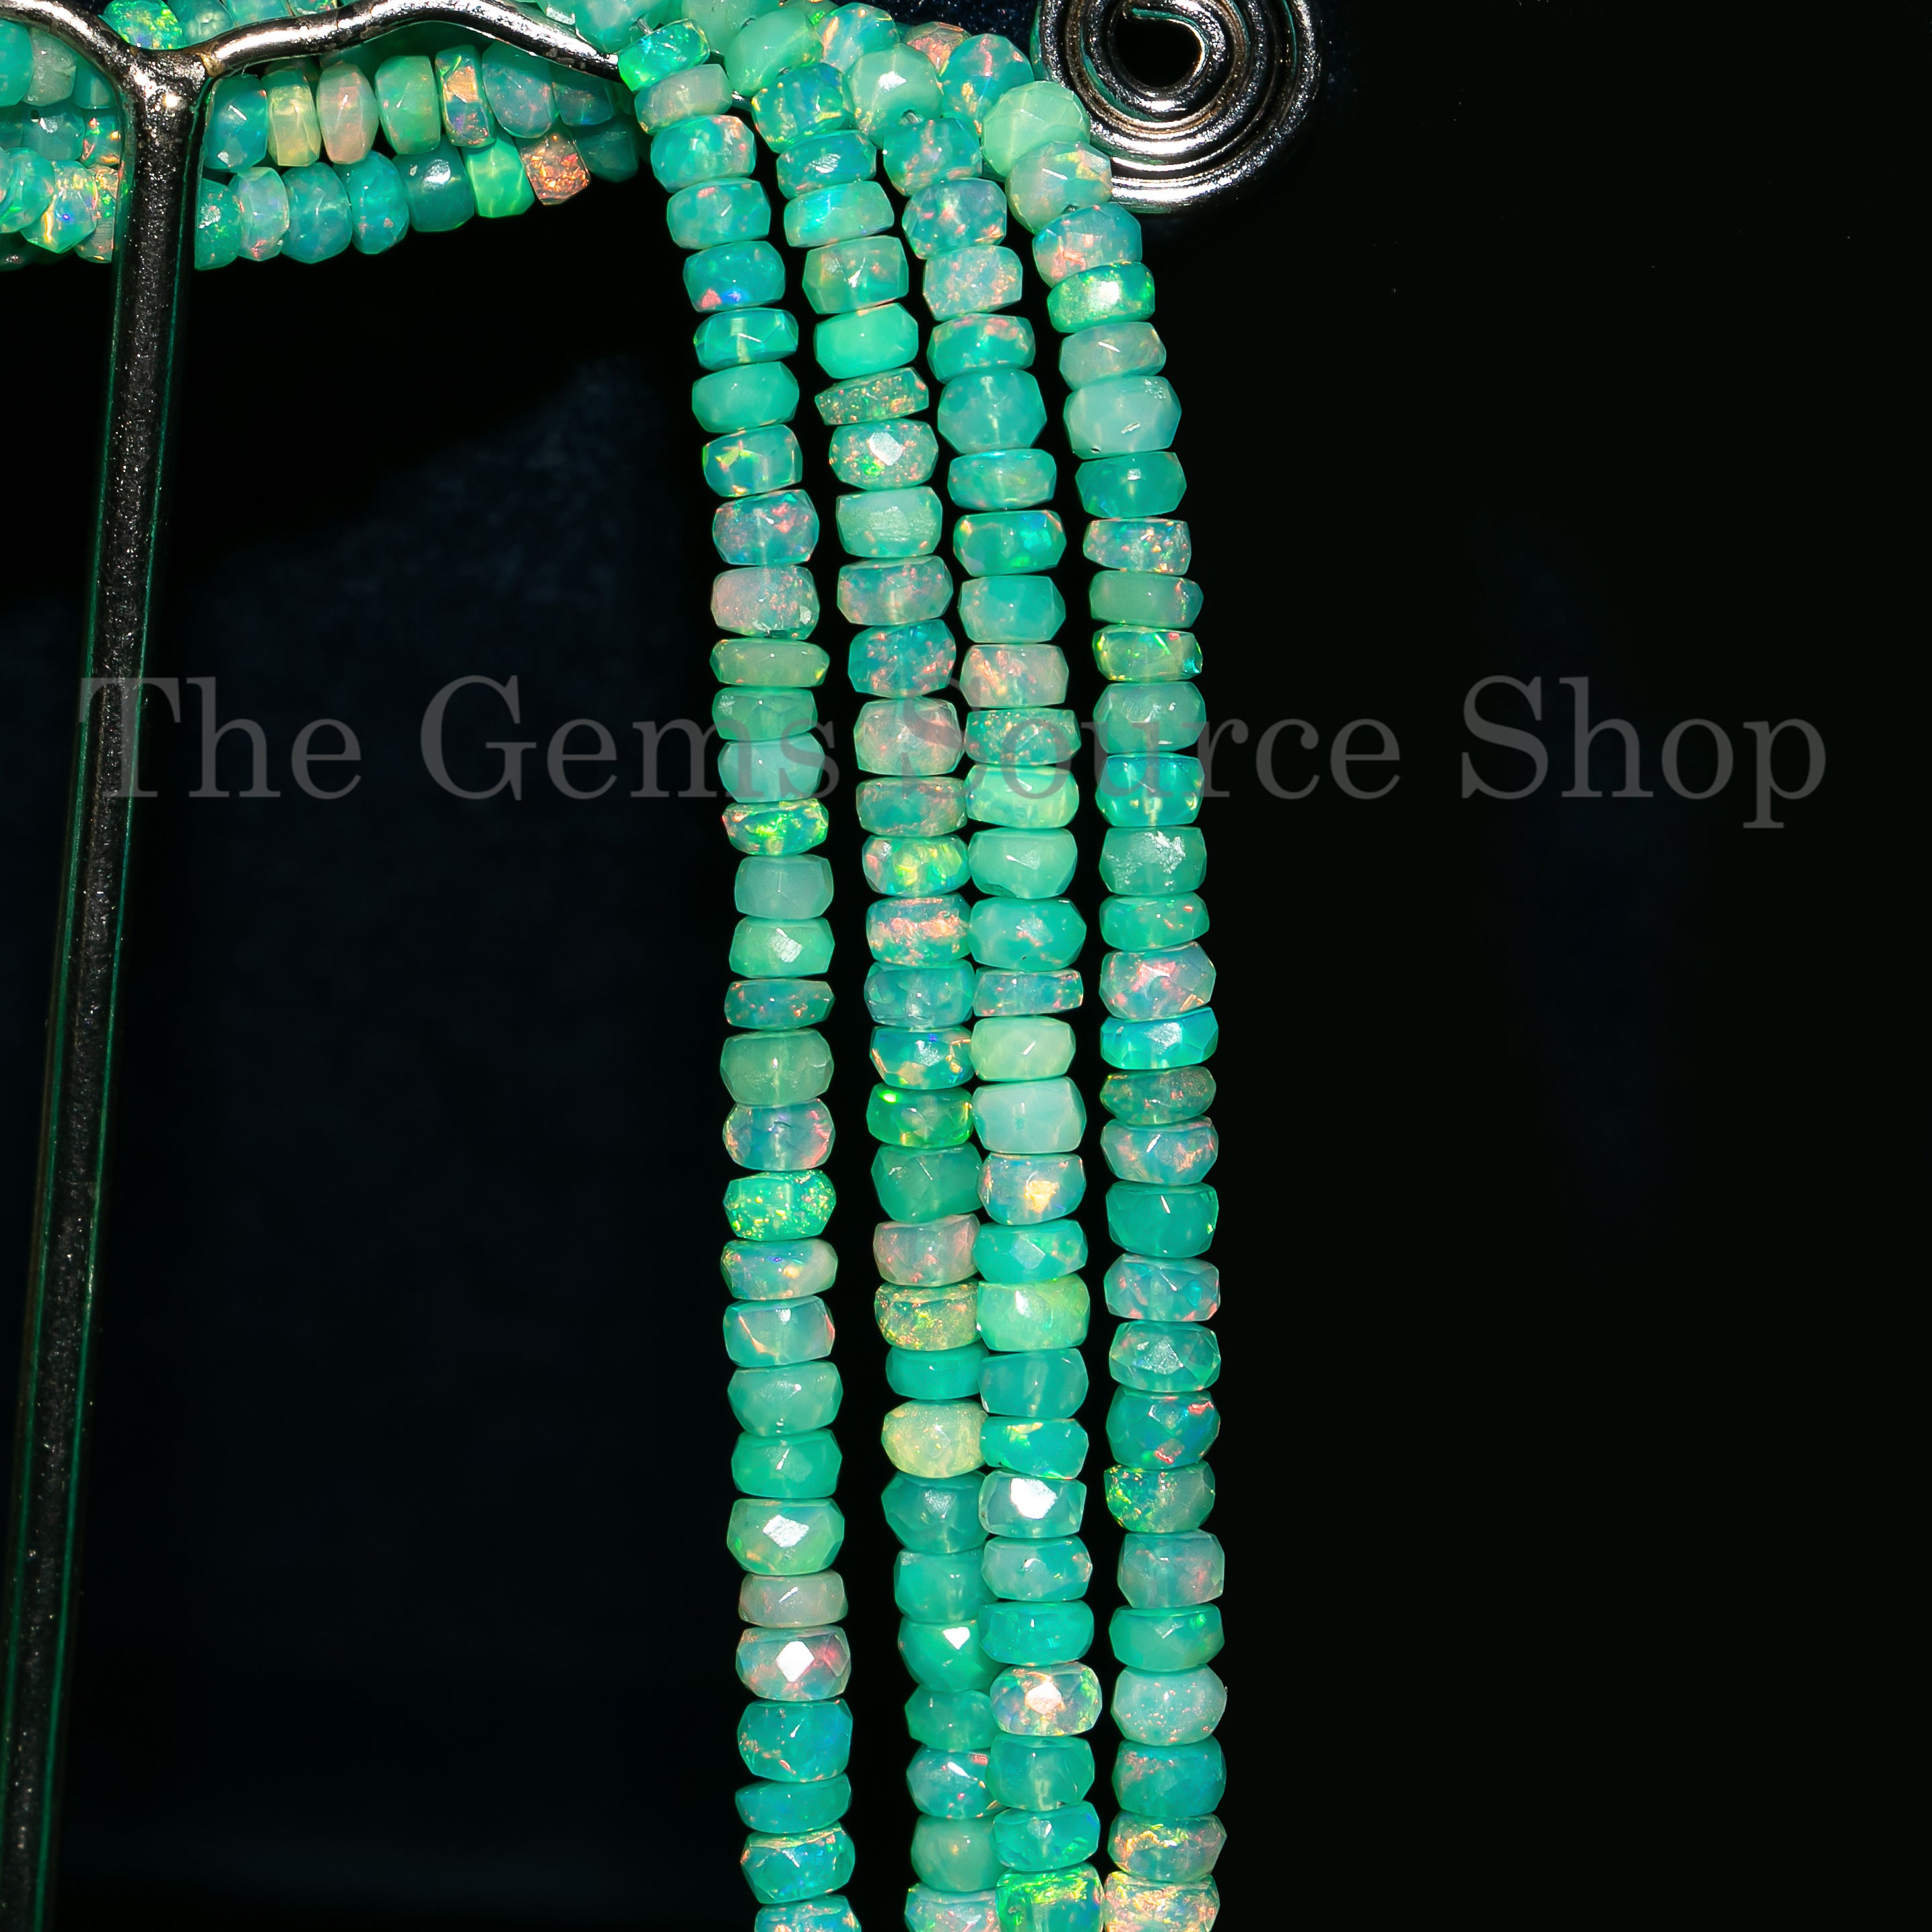 Green Opal Gemstone Beads, Opal Faceted Rondelle Beads, Opal Jewelry Beads